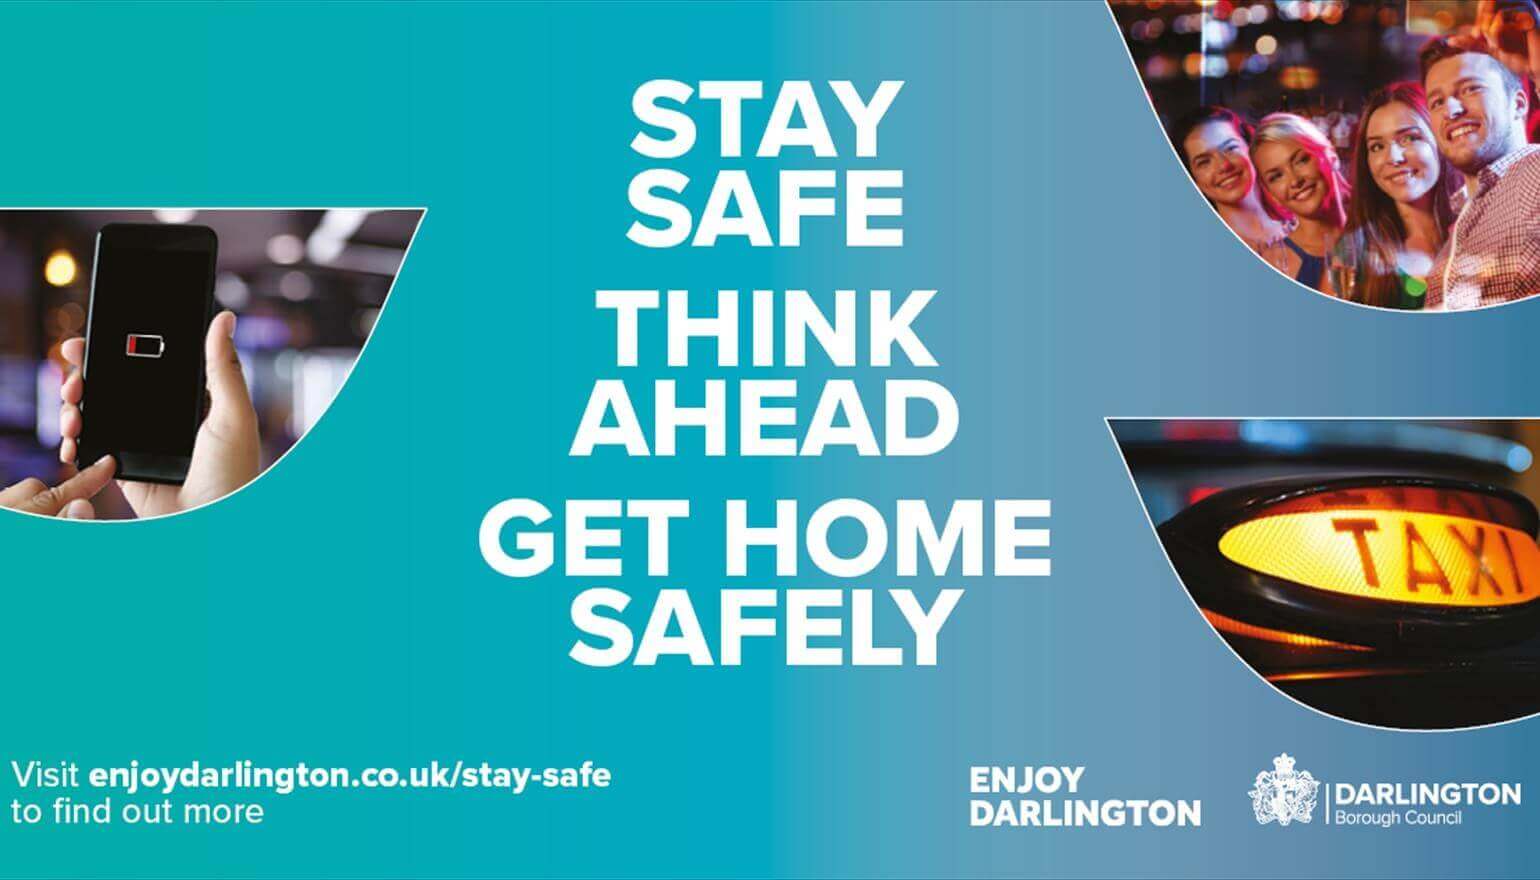 Have a safer night out this festive season